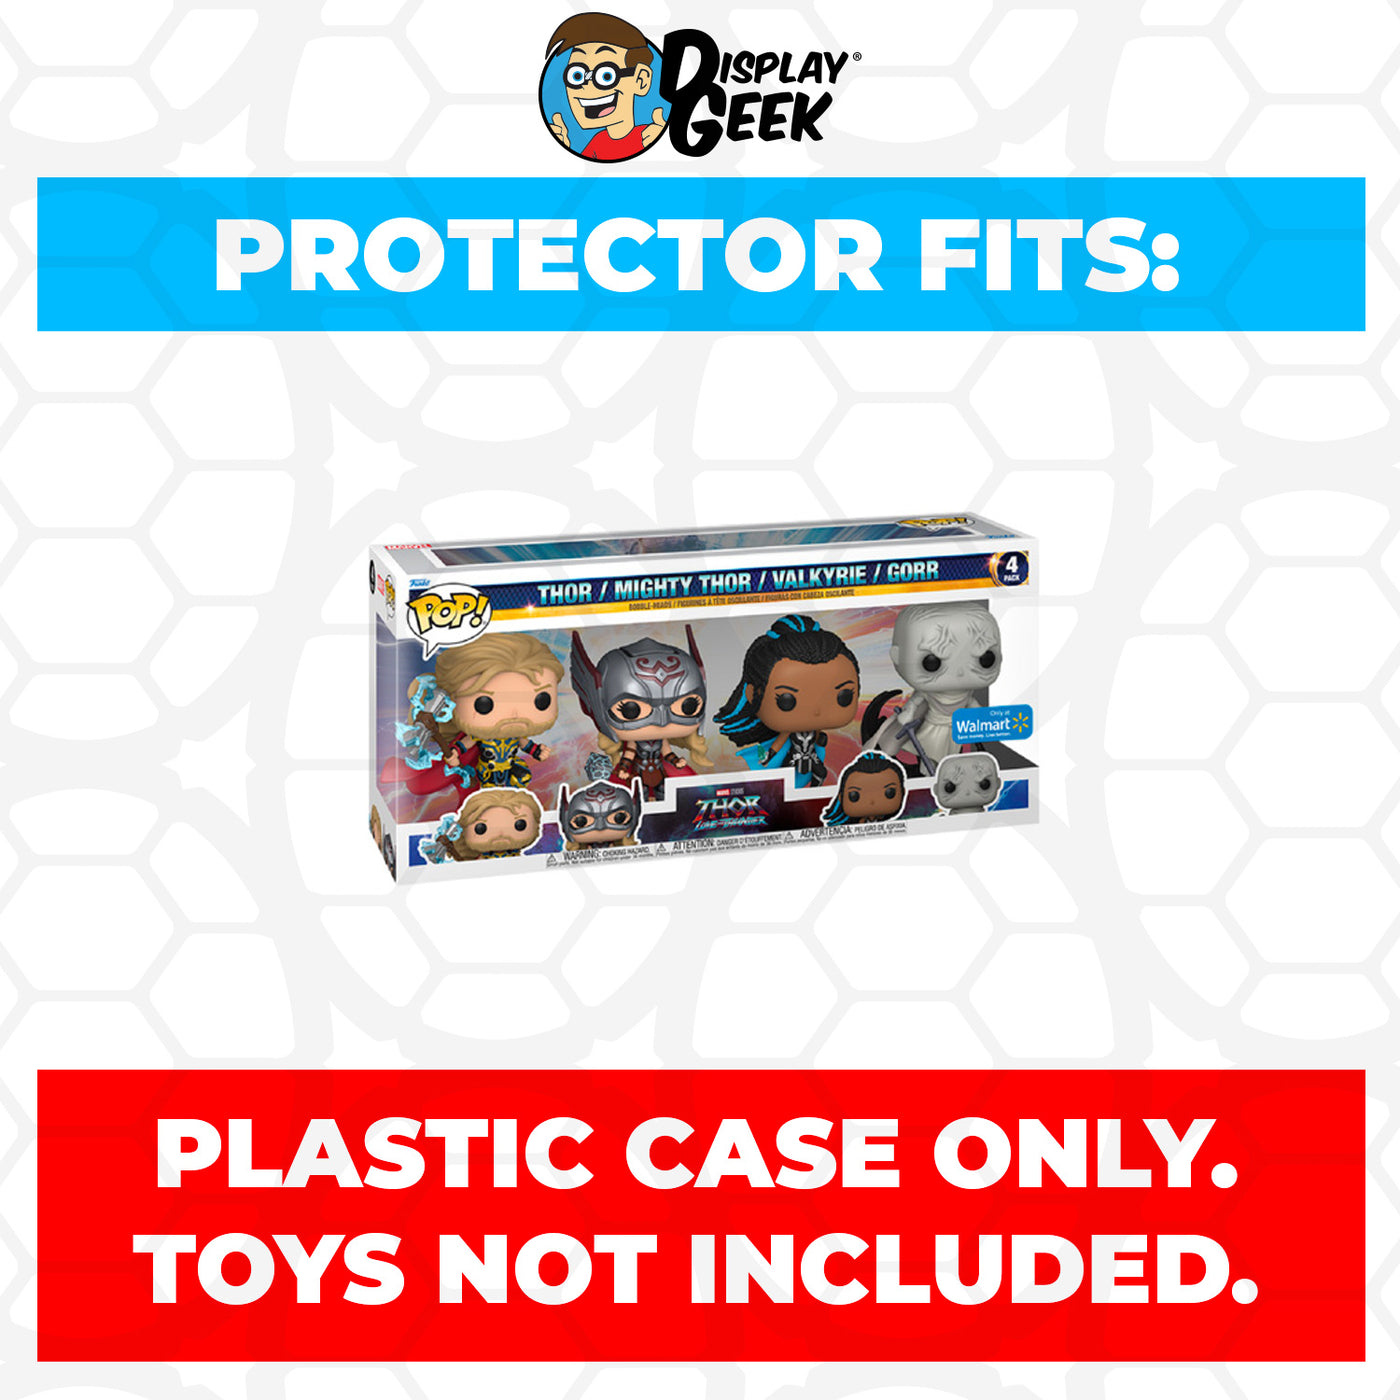 Pop Protector for 4 Pack Pop Protector for 4 Pack Thor Love & Thunder Thor, Mighty Thor, Valkyrie & Gorr Funko Pop Funko Pop on The Protector Guide App by Display Geek